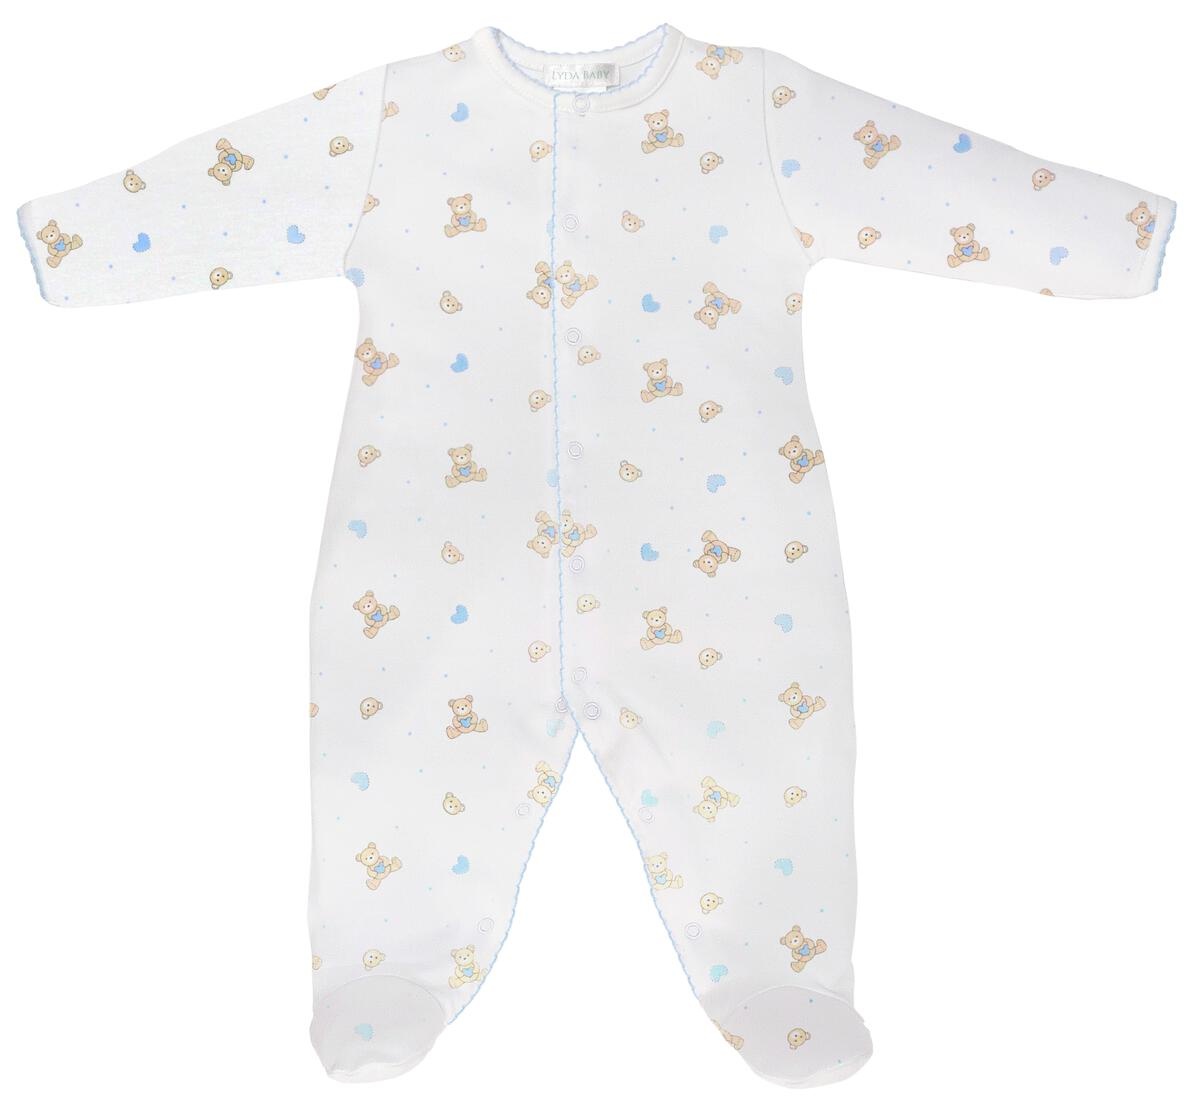 LydaBaby White/Blue Love Teddy Footie